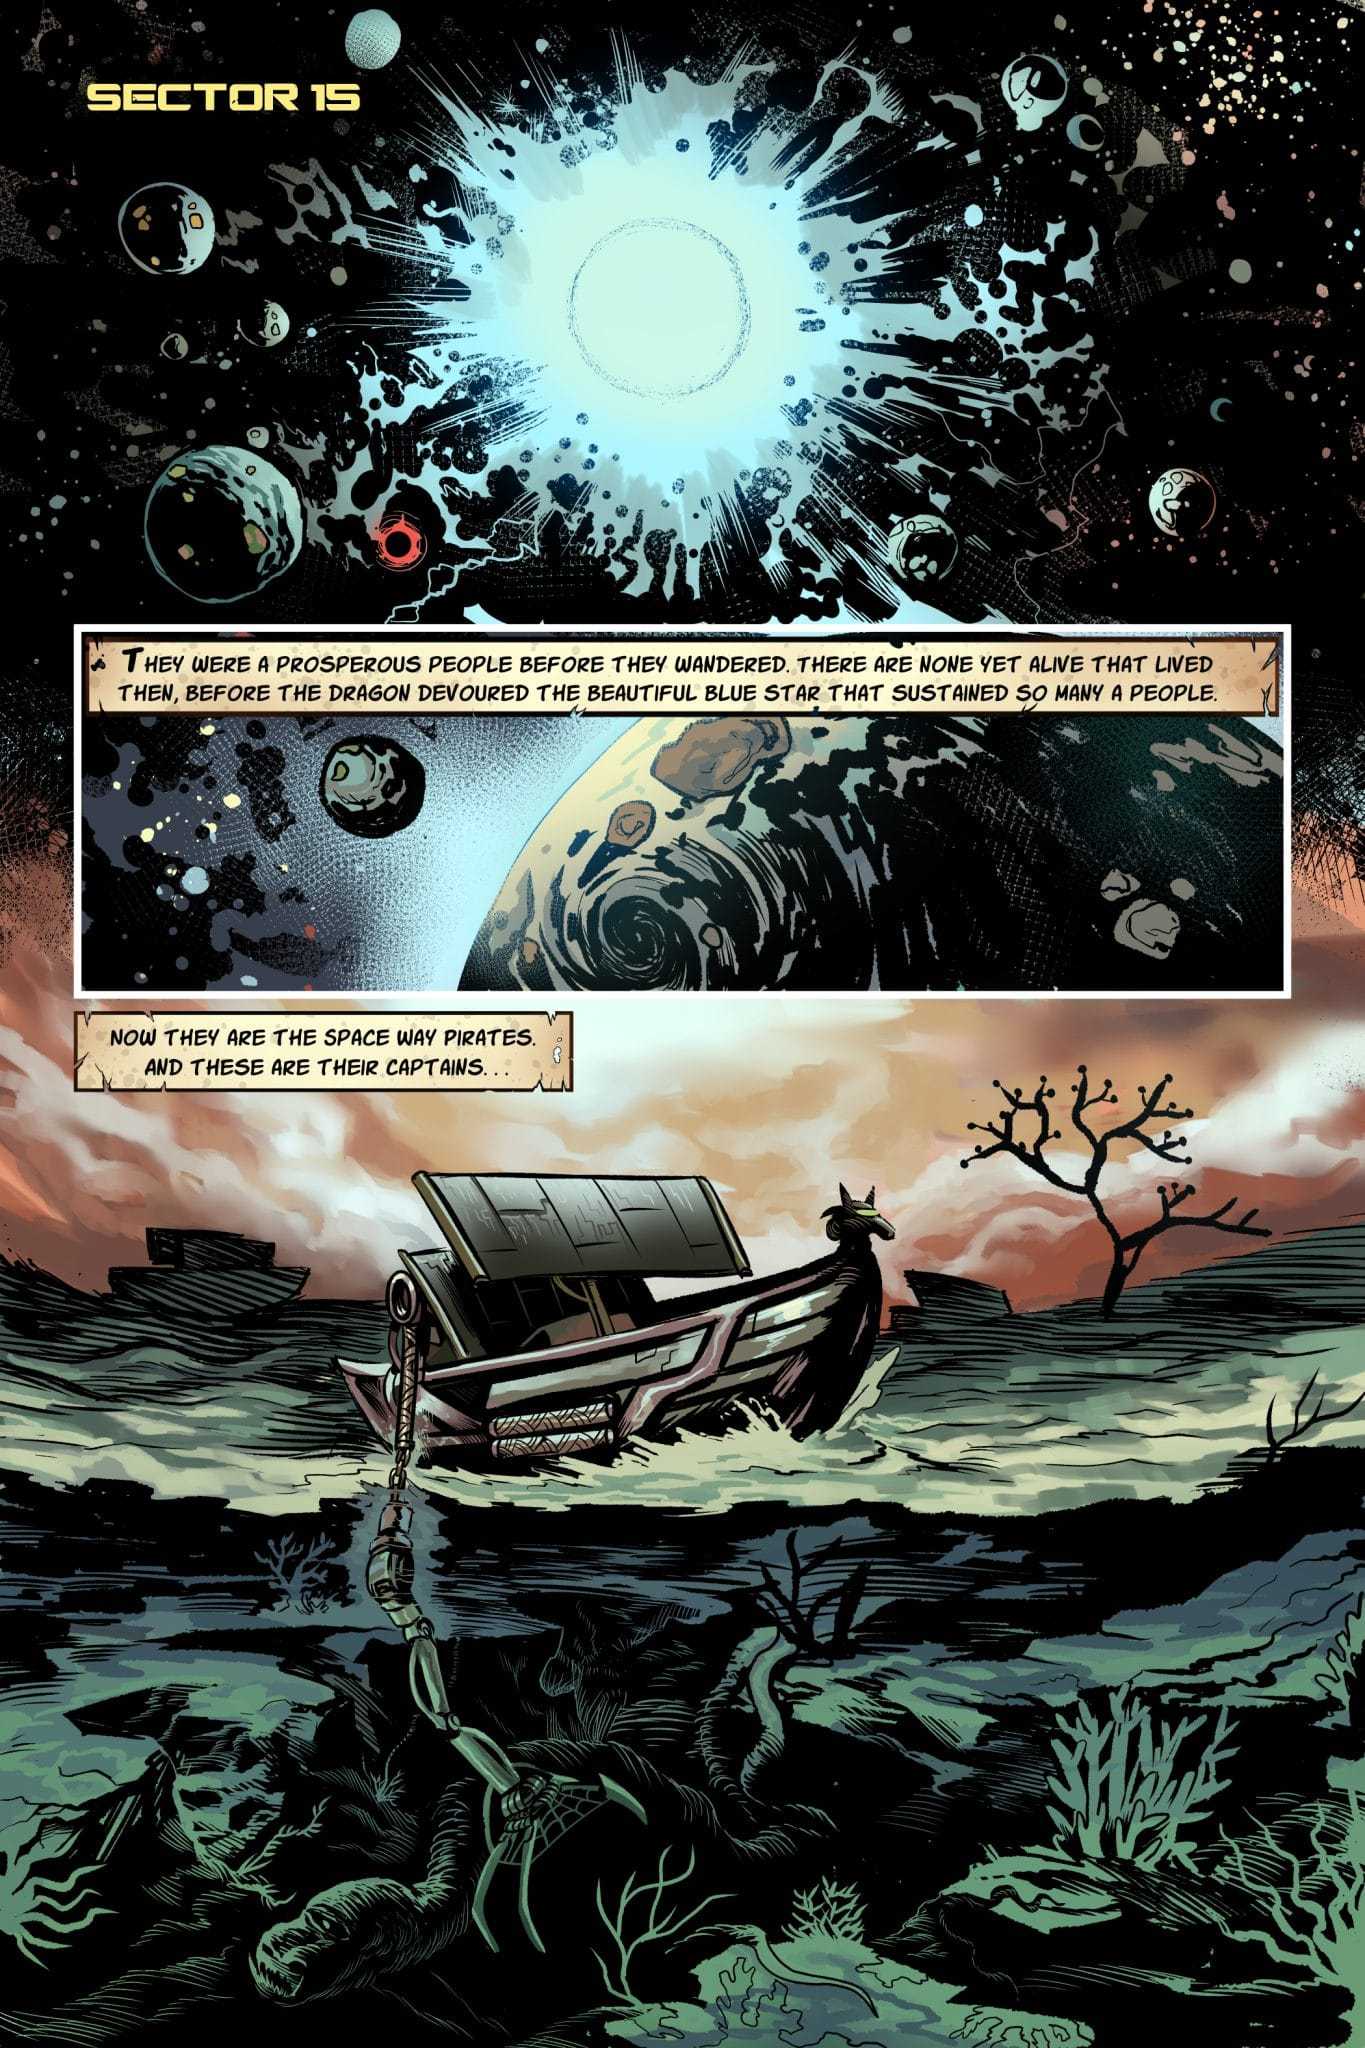 Sample page from Tales of the Stars Issue Captains series